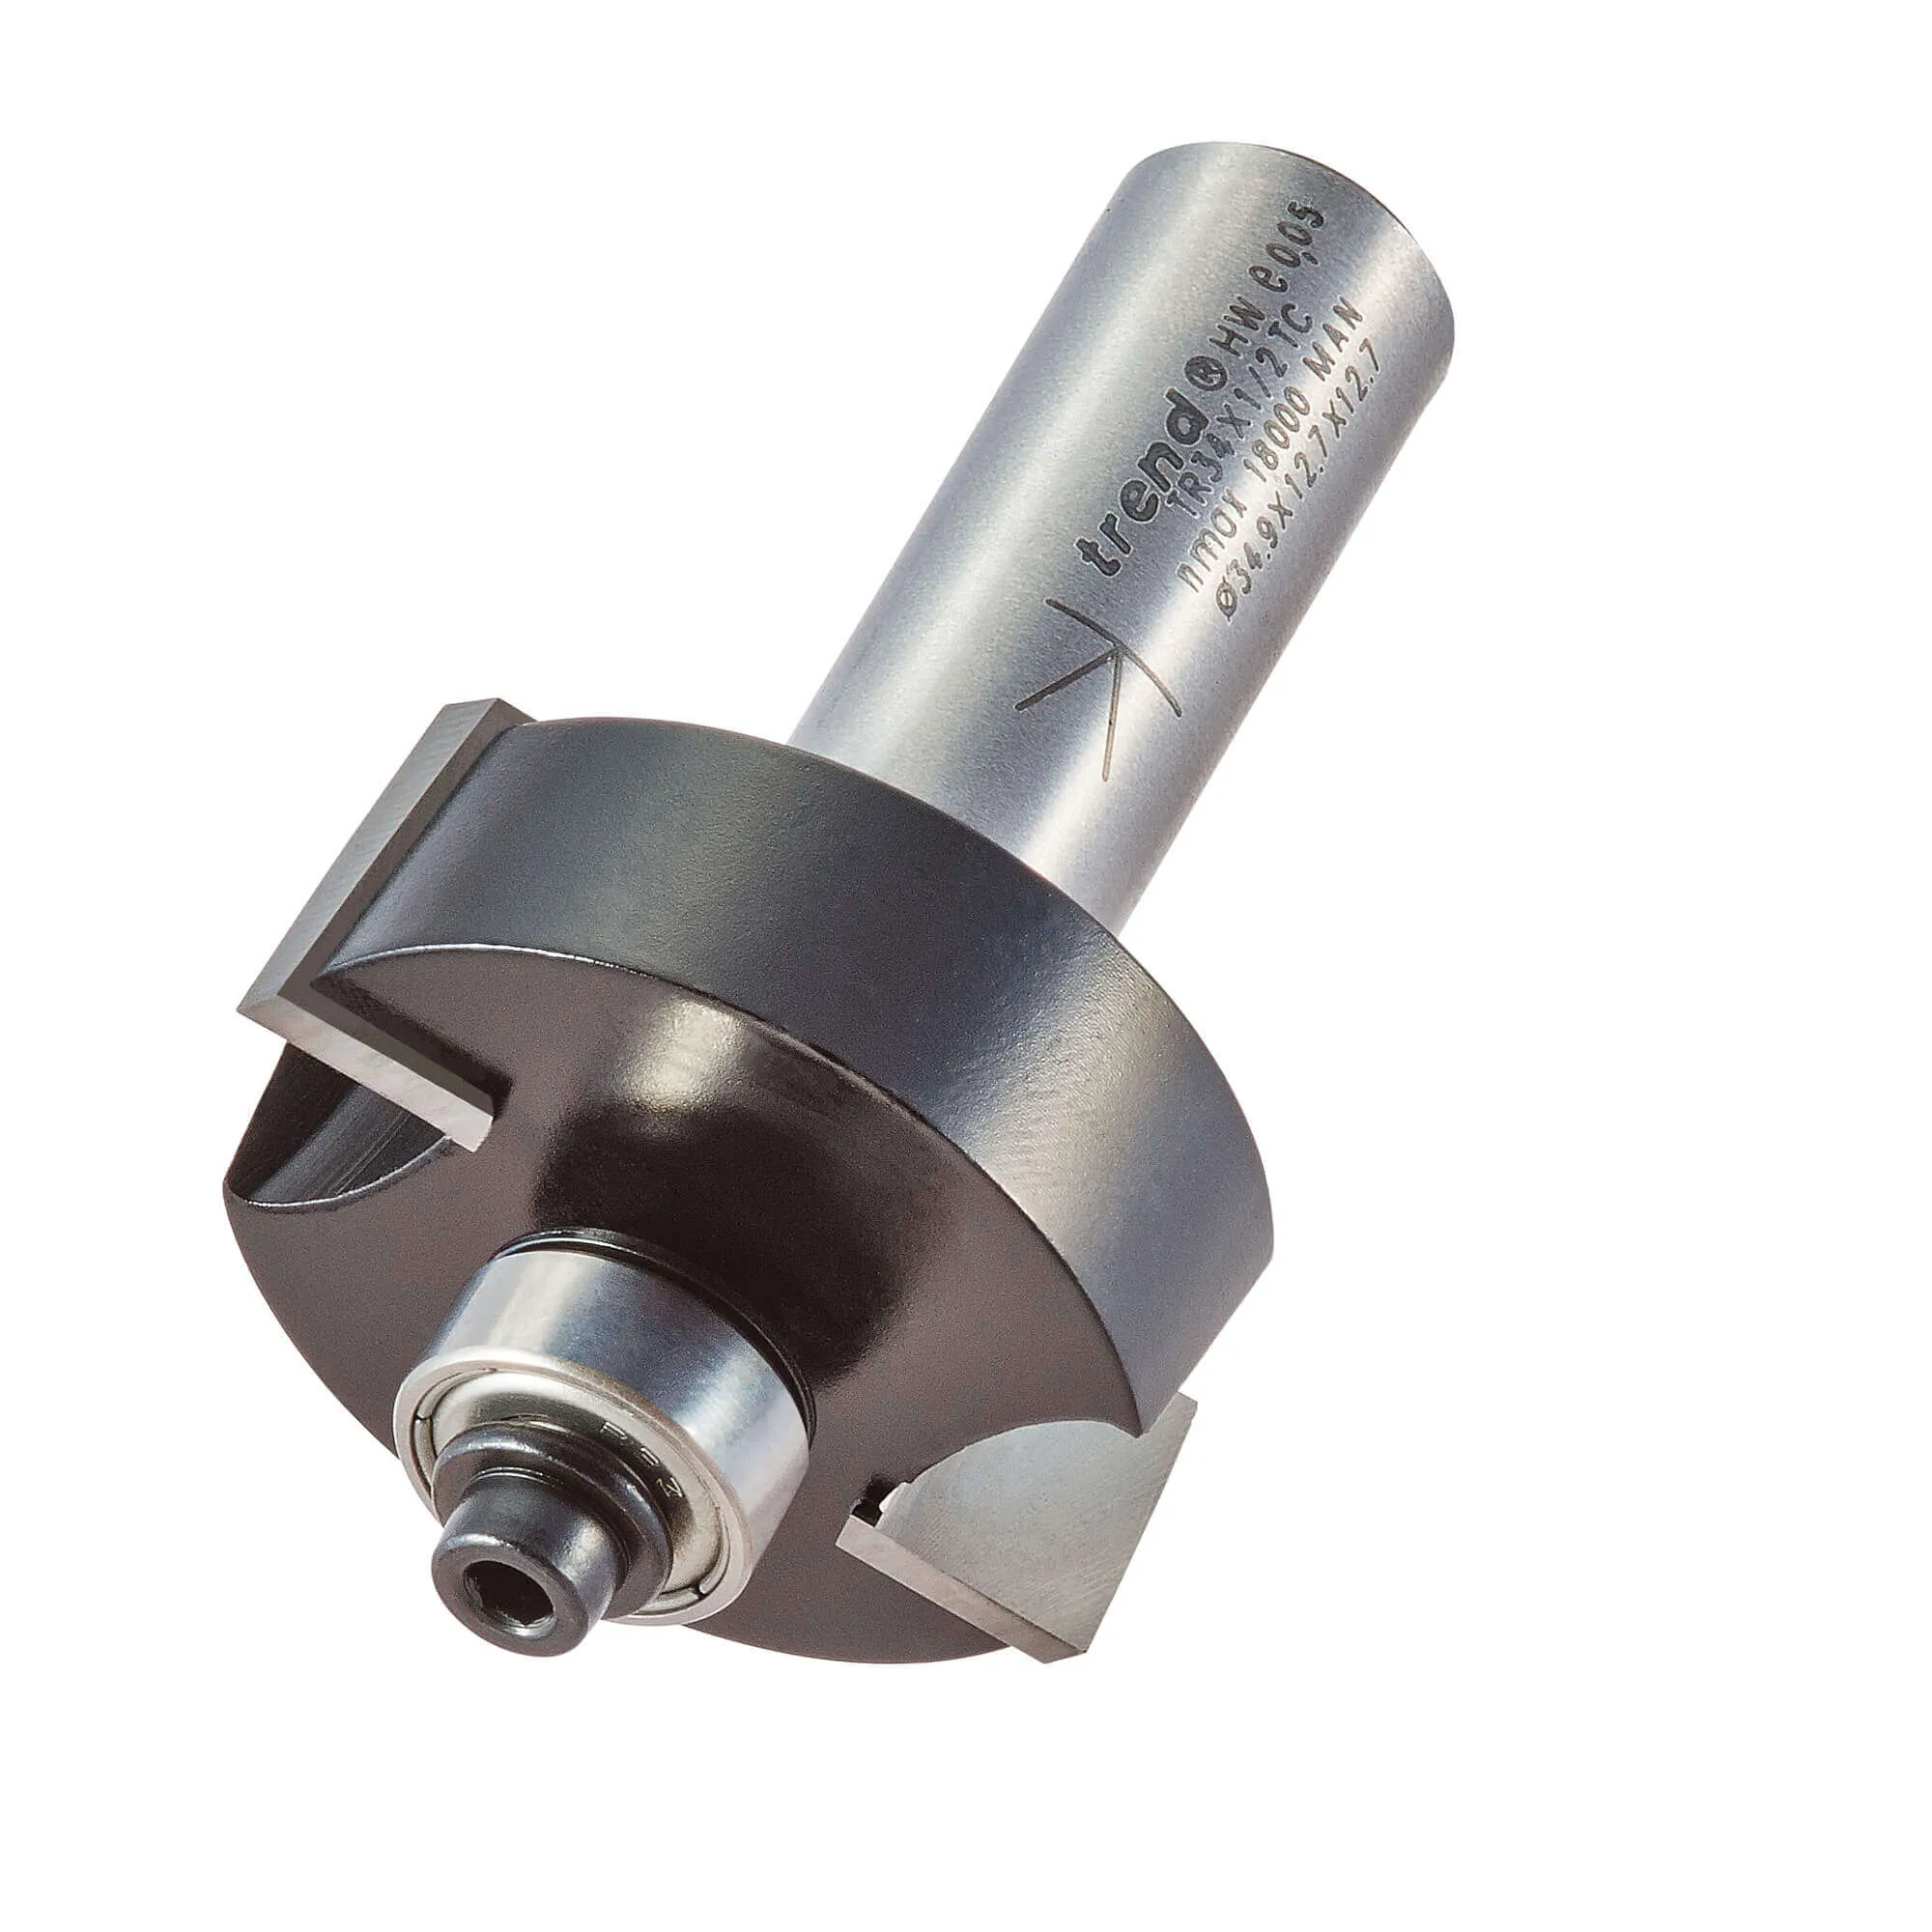 Trend TRADE RANGE Bearing Guided Rebater Router Cutter - 35mm, 1/2"